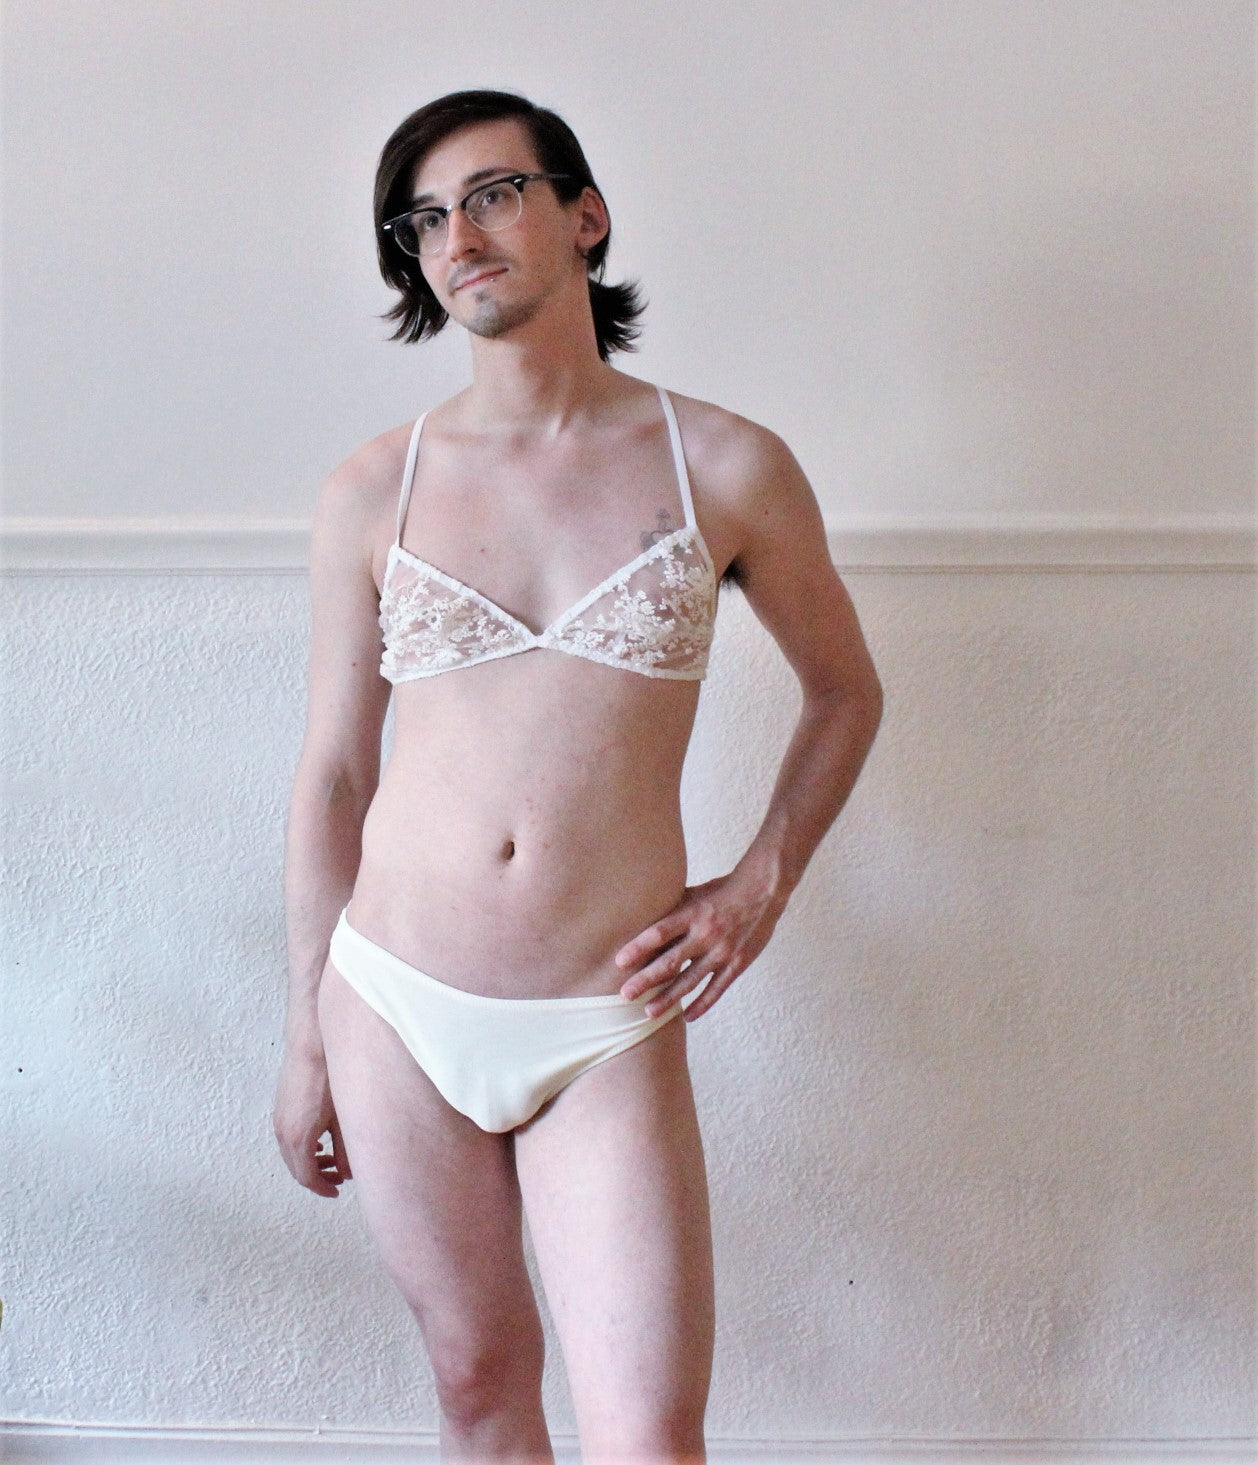 Person standing front on, wearing white thong underwear and bra